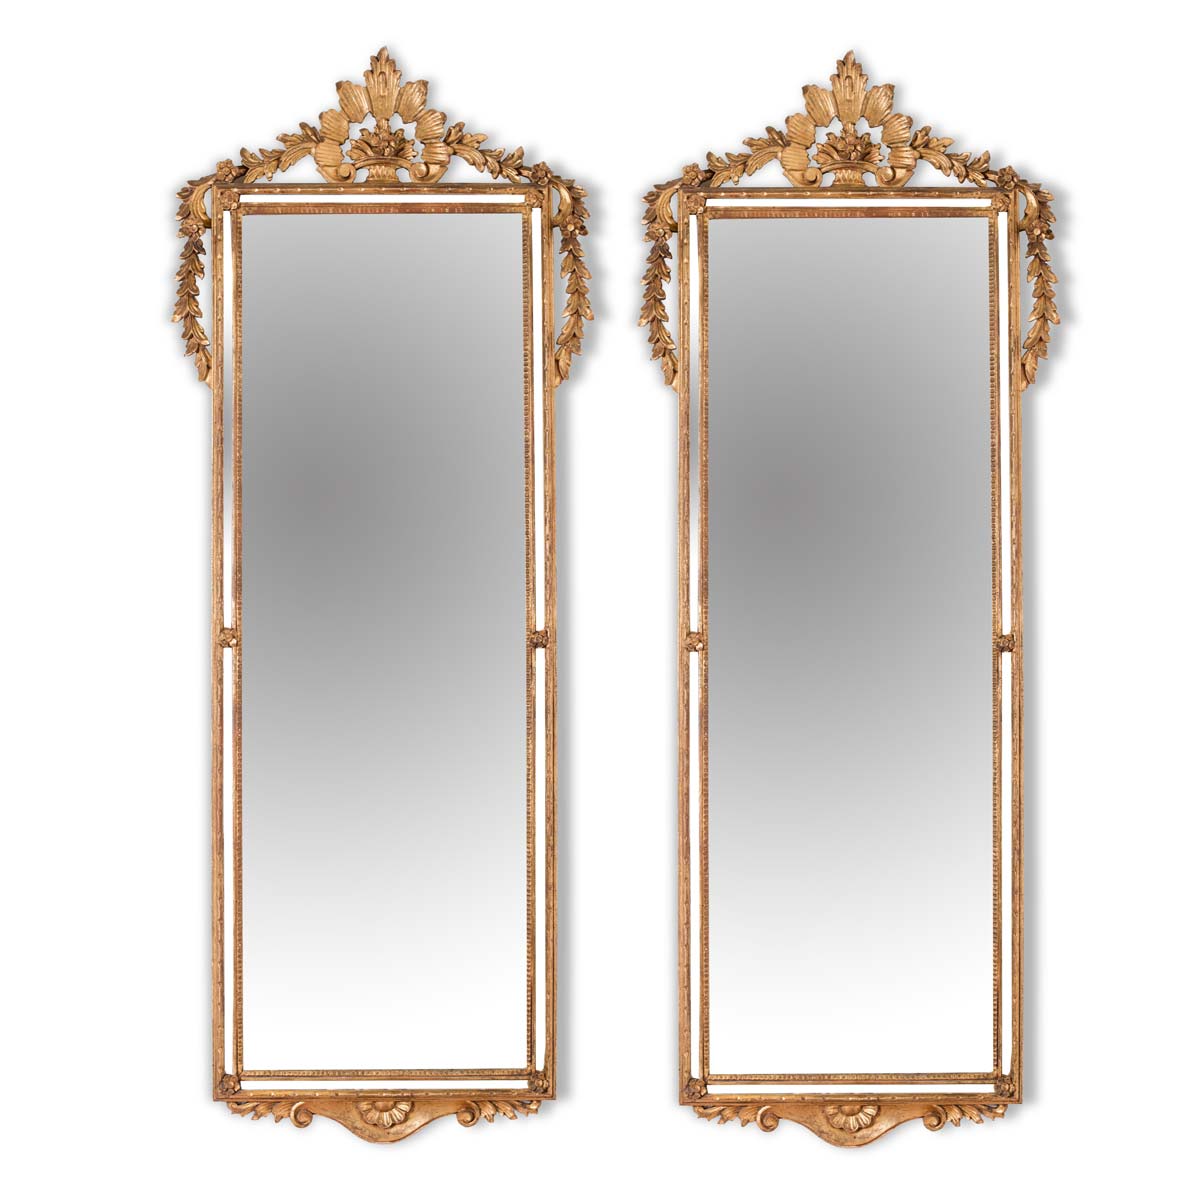 Pair of carved and gilt wood mirrors, 20th Century.